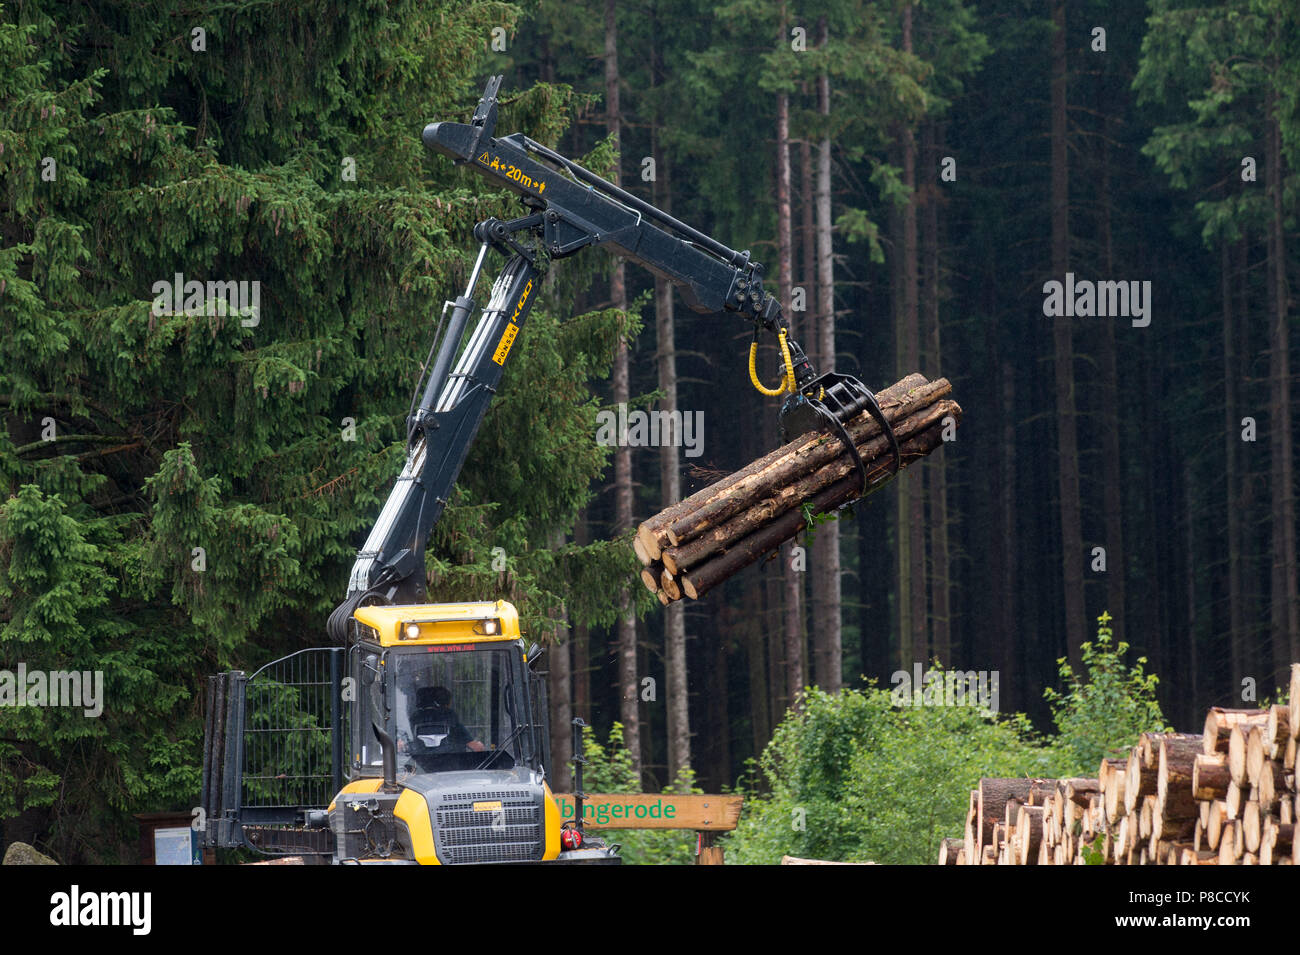 Drei Annen Hohne, Germany. 21st June, 2018. A bulldozer with gripper arm stacks spruce trunks, which were overturned during a storm. Getting rid of the bark is intended to destroy the habitat of the bark beetles. Heavy storms were raging several months ago over many parts of Germany and caused havoc in the forests. Now bark beetles are setting up residence in the overturned spruce trees. Credit: Klaus-Dietmar Gabbert/dpa-Zentralbild/dpa/Alamy Live News Stock Photo